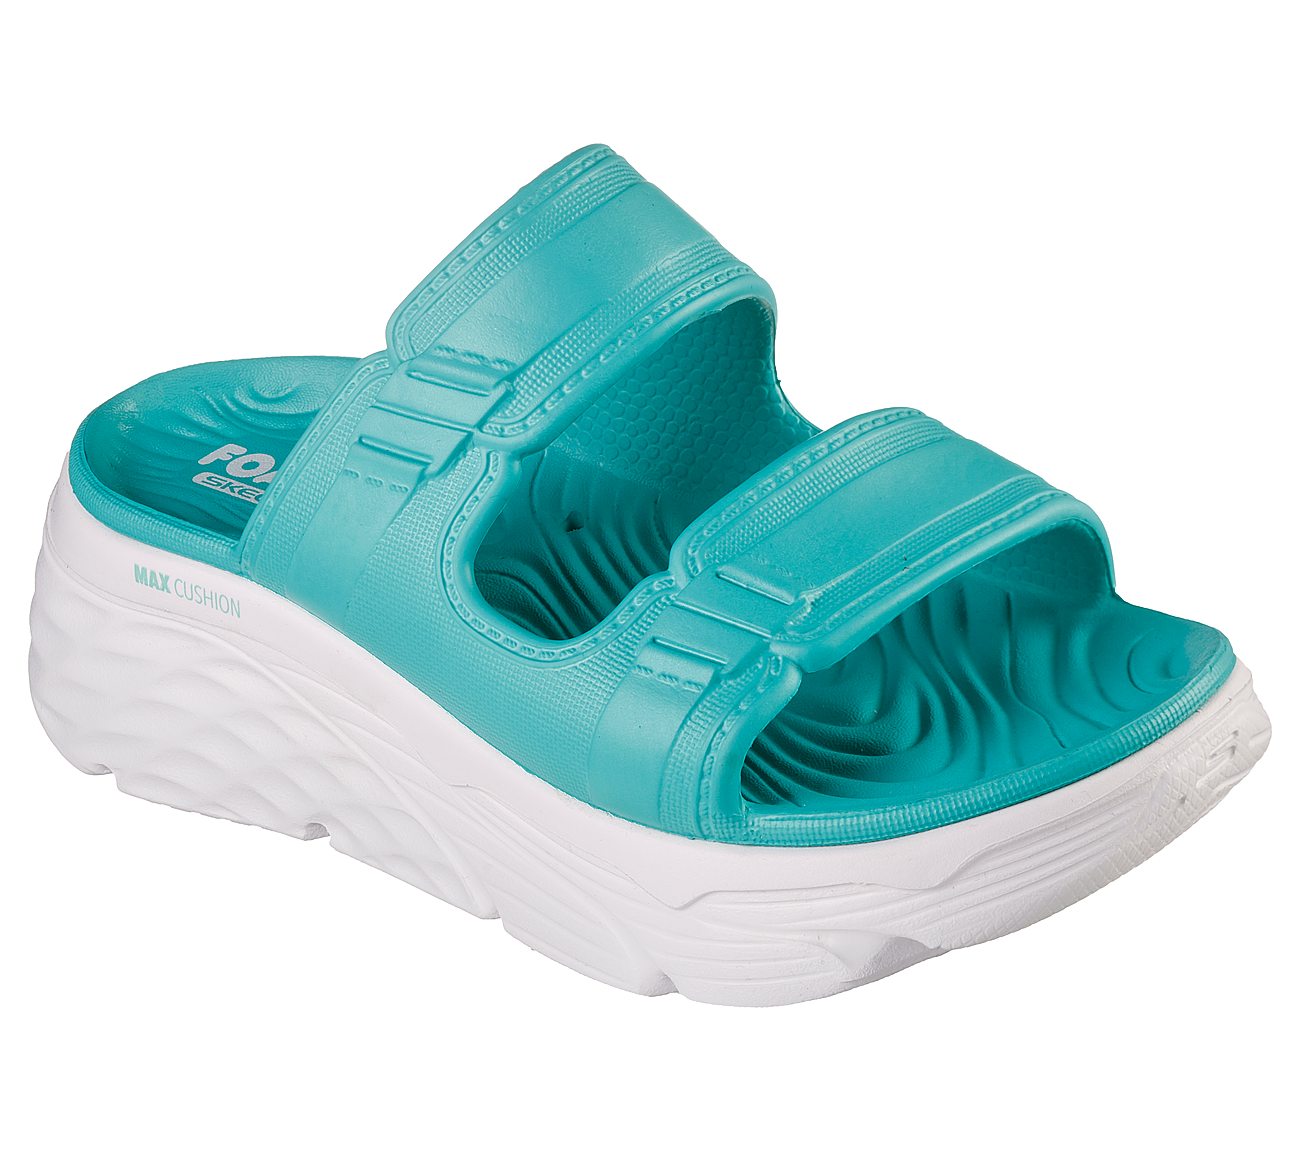 skechers cushioned sandals